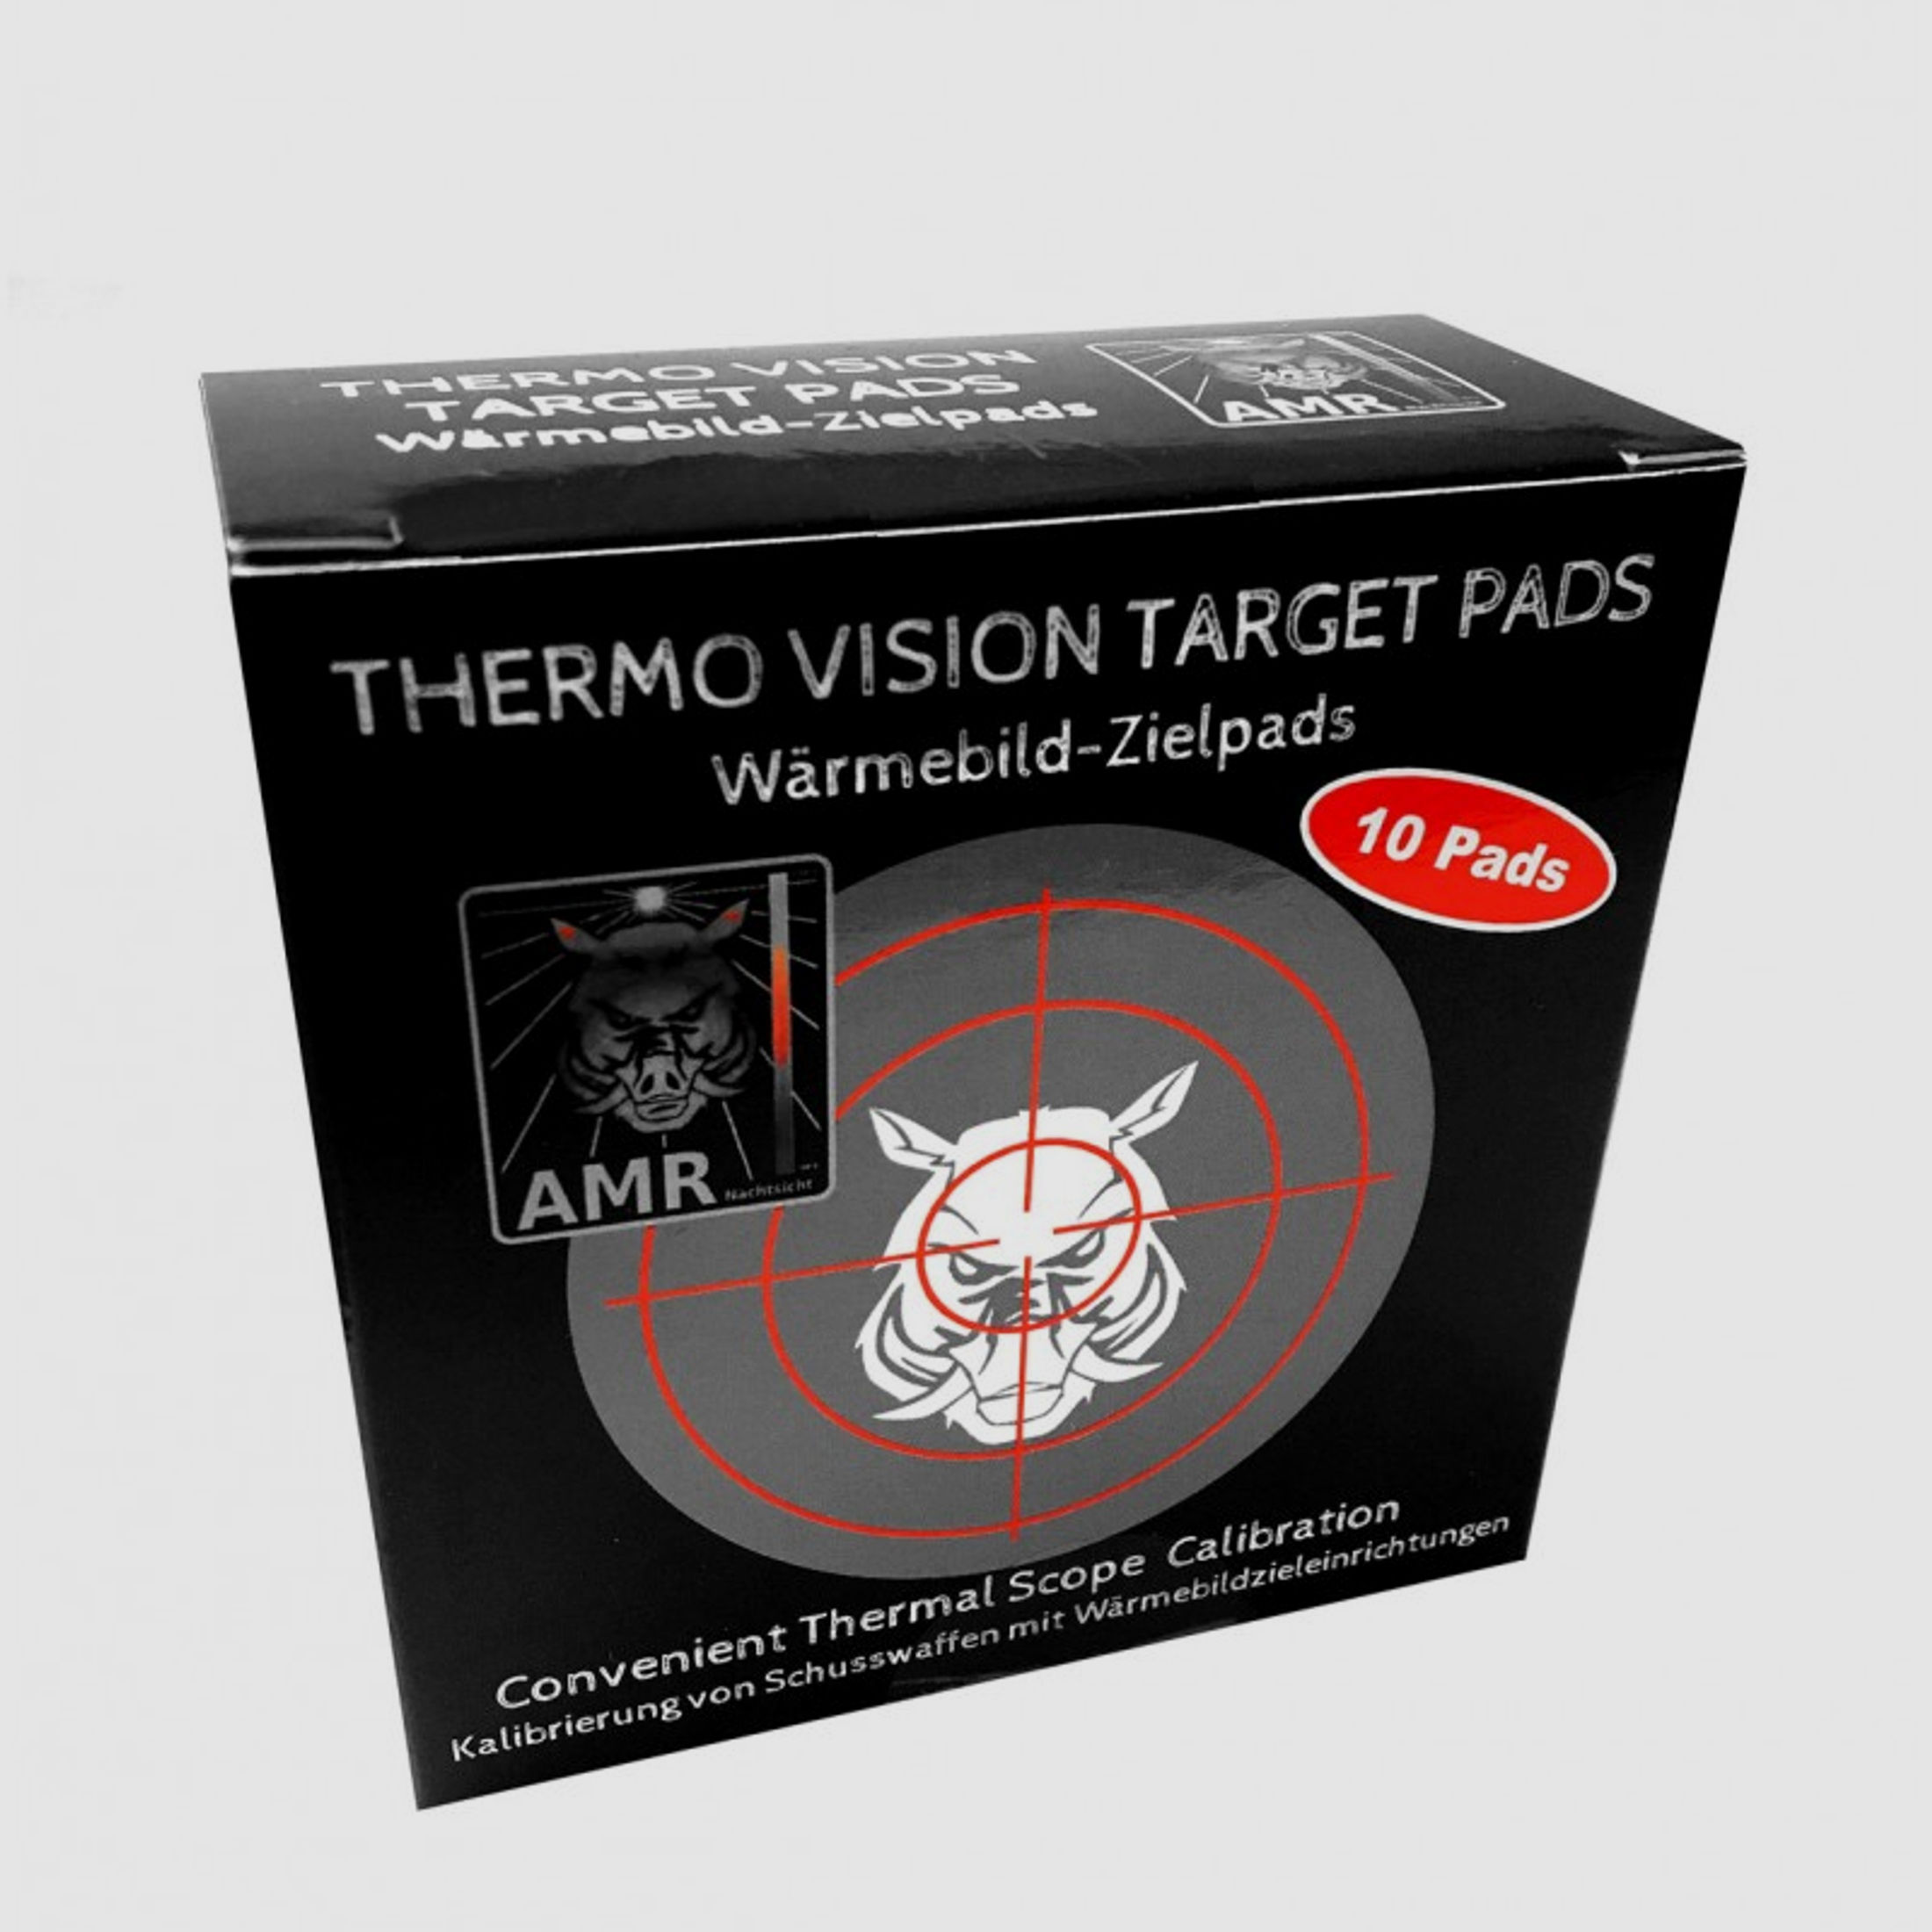 AMR Thermo Vision Target Pads - 10 Stück